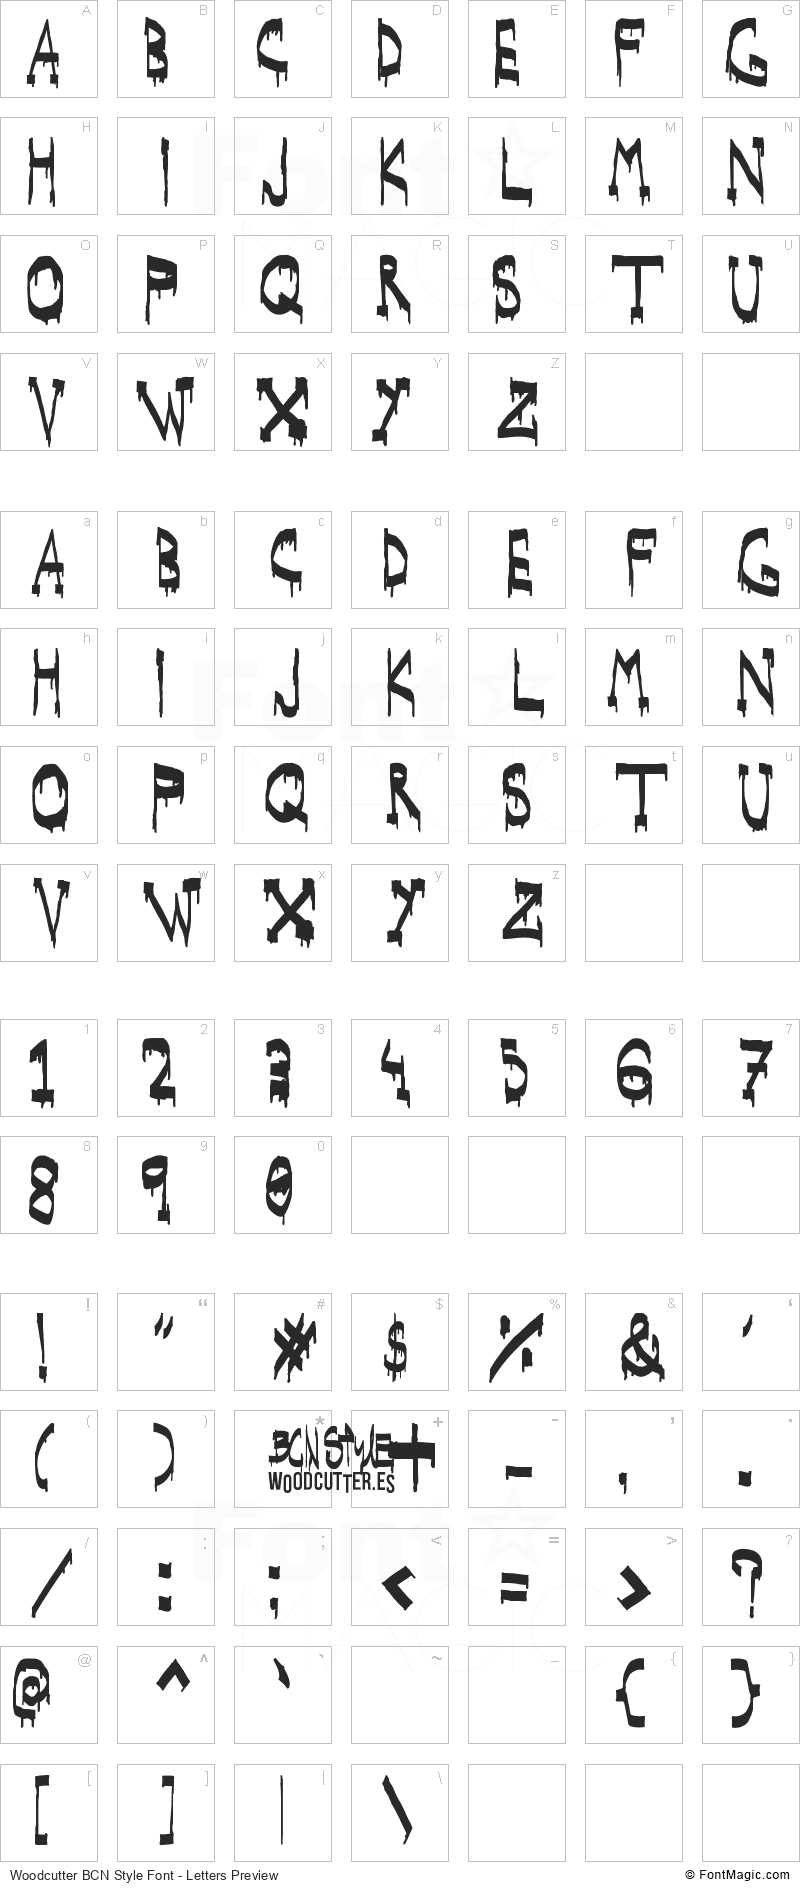 Woodcutter BCN Style Font - All Latters Preview Chart